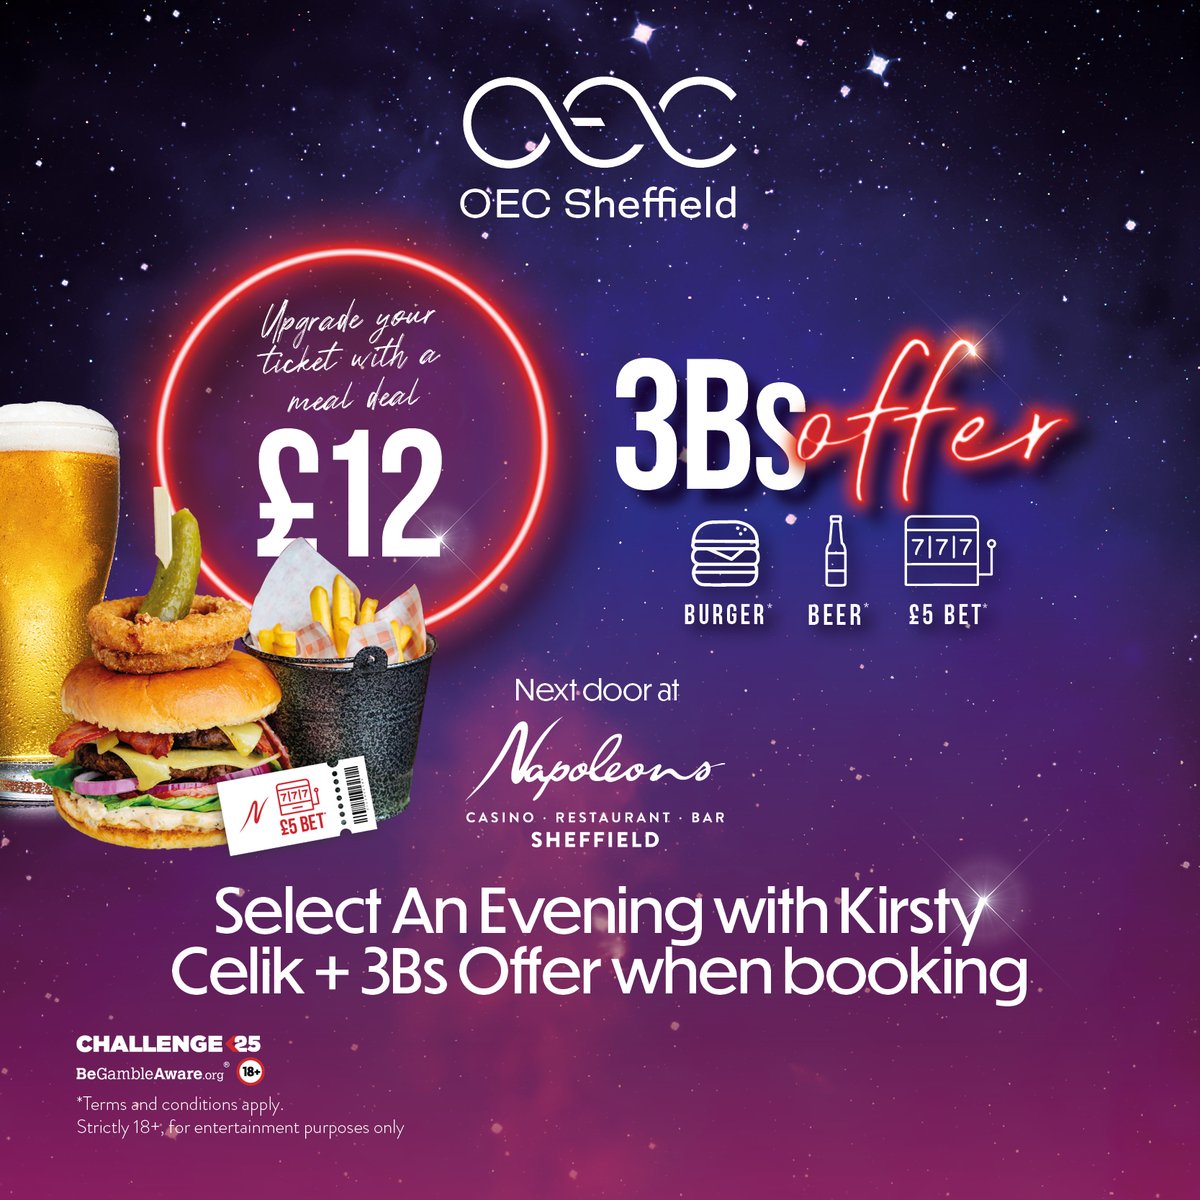 Join us for an unforgettable evening with renowned #medium Kirsty Celik as she connects with the spirit world to bring messages of love, healing, and guidance... 🔮 ✨ Add a dining experience at Napoleons Casino, #Sheffield? 🍔 🍺 Book now 👉 shorturl.at/kGOU8